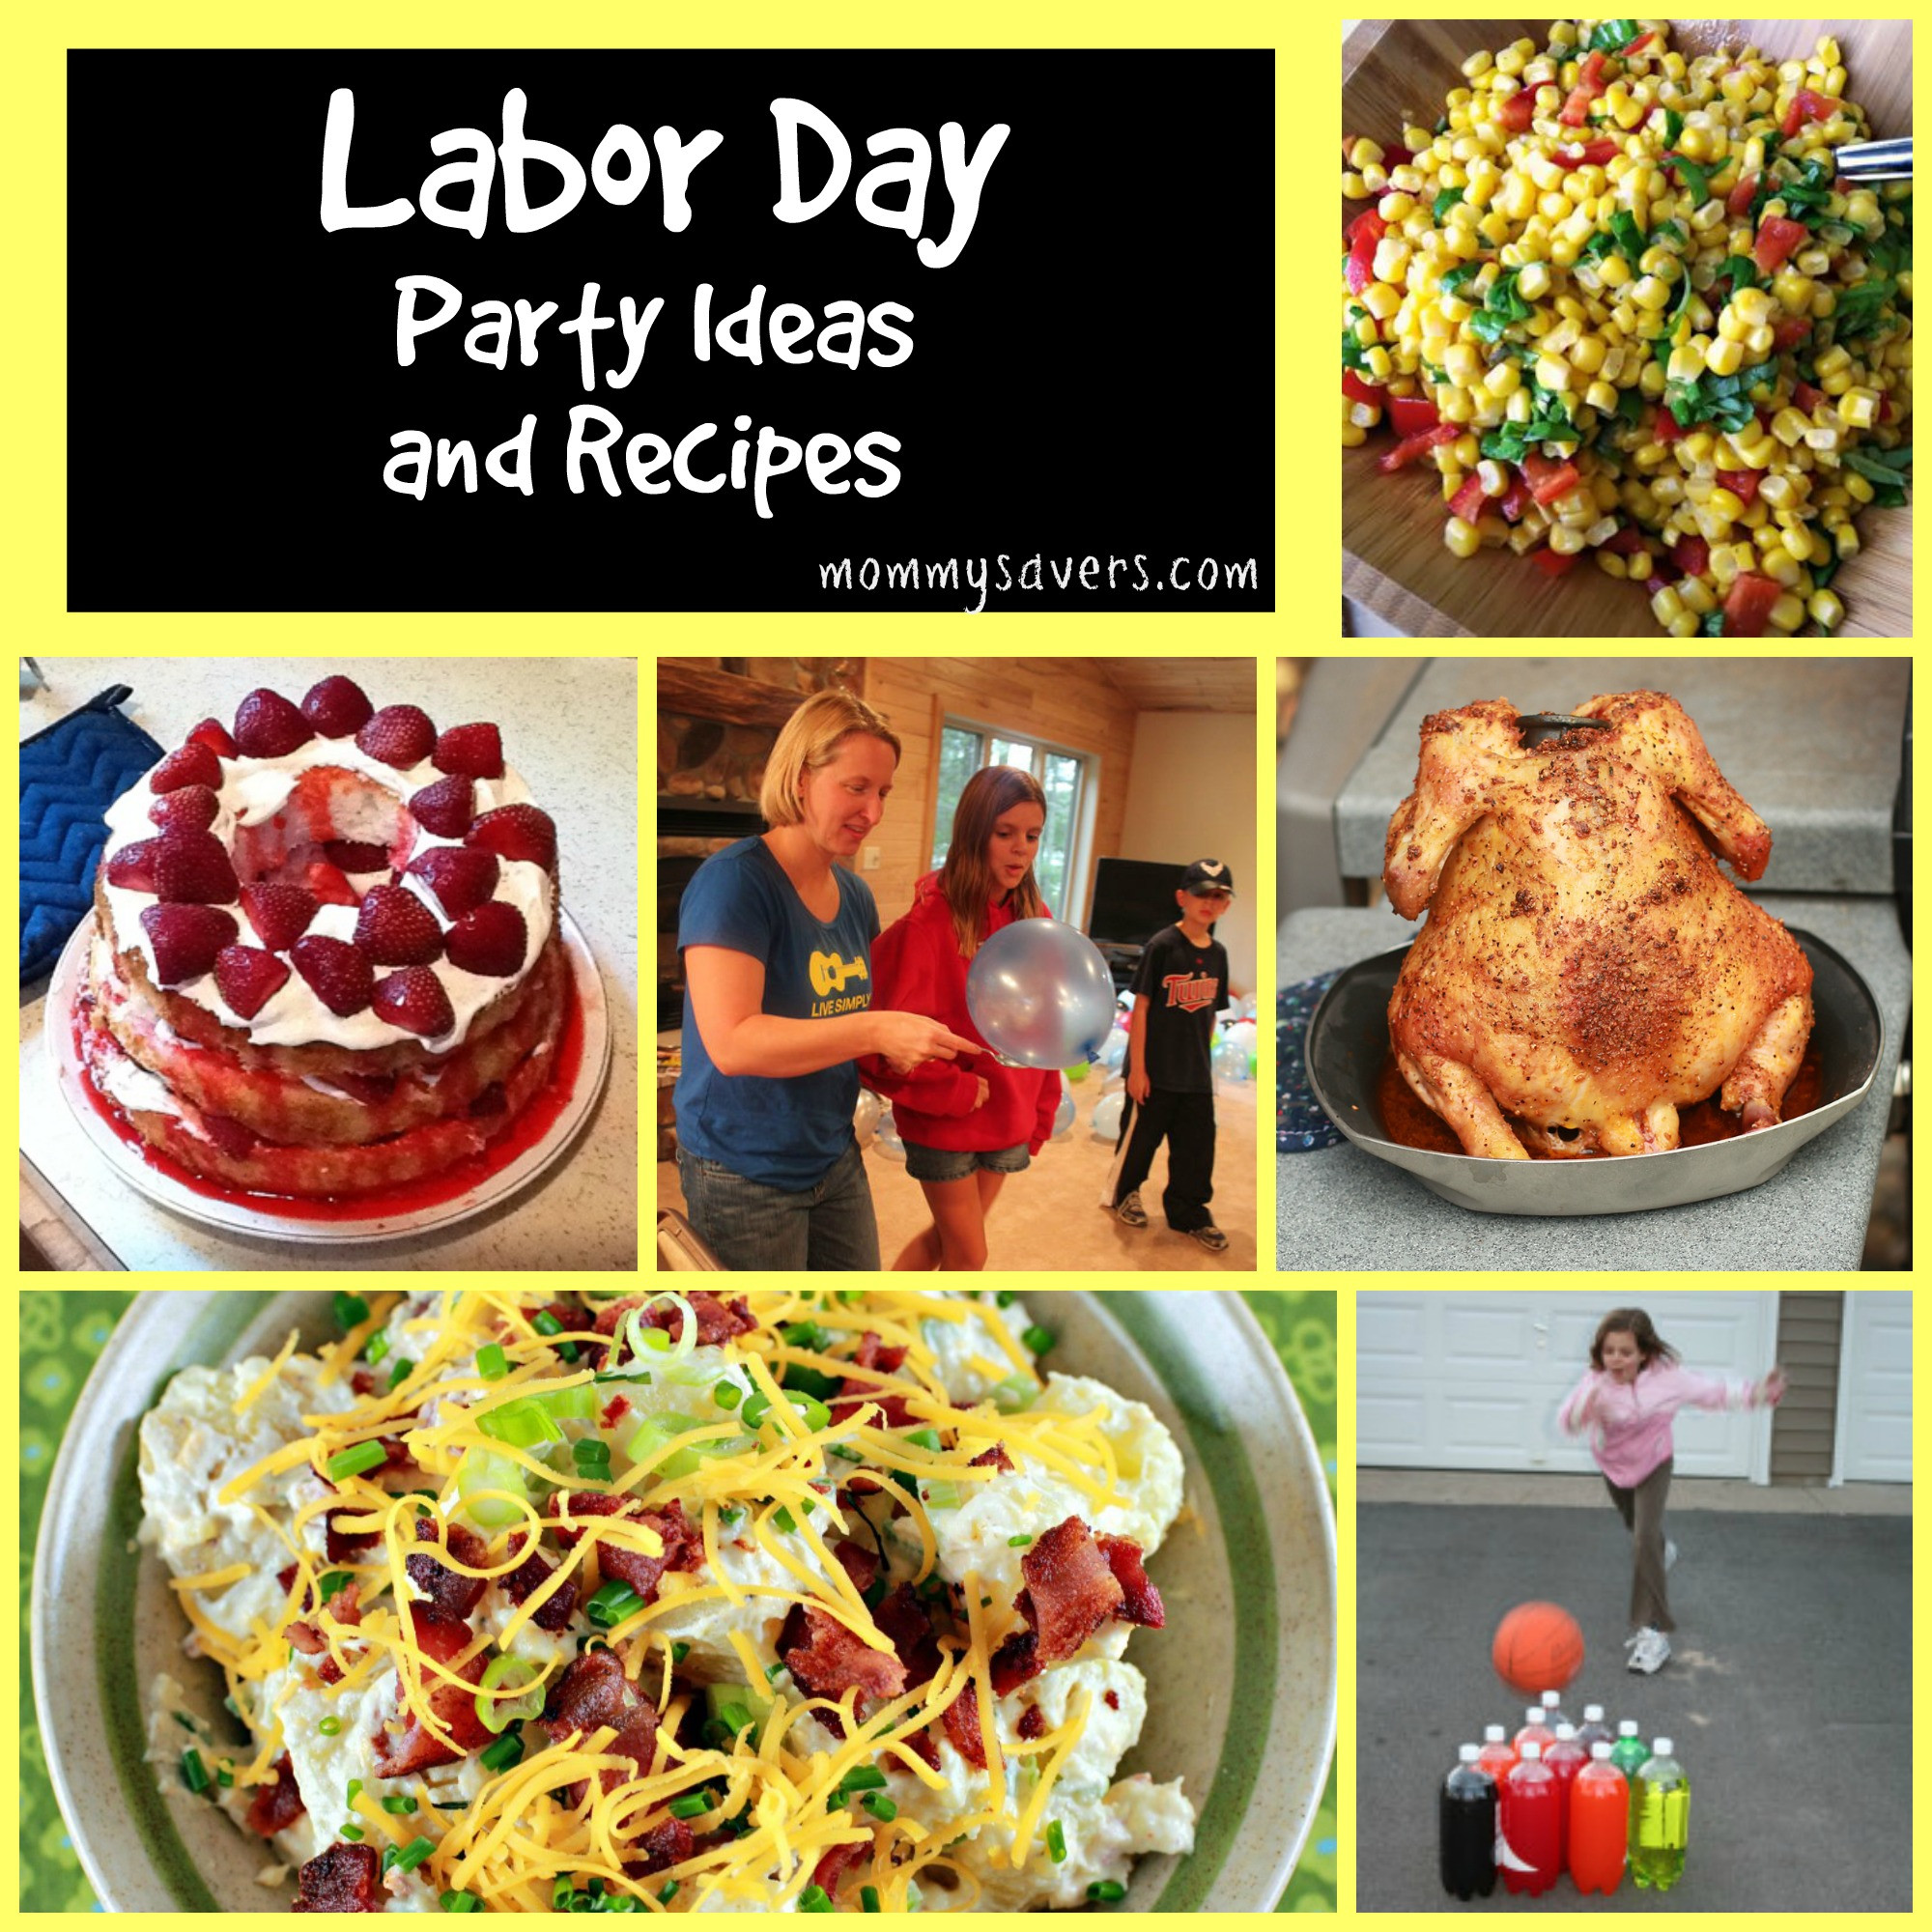 Labor Day Dinner Ideas
 Labor Day Party Ideas and 25 Recipes Mommysavers